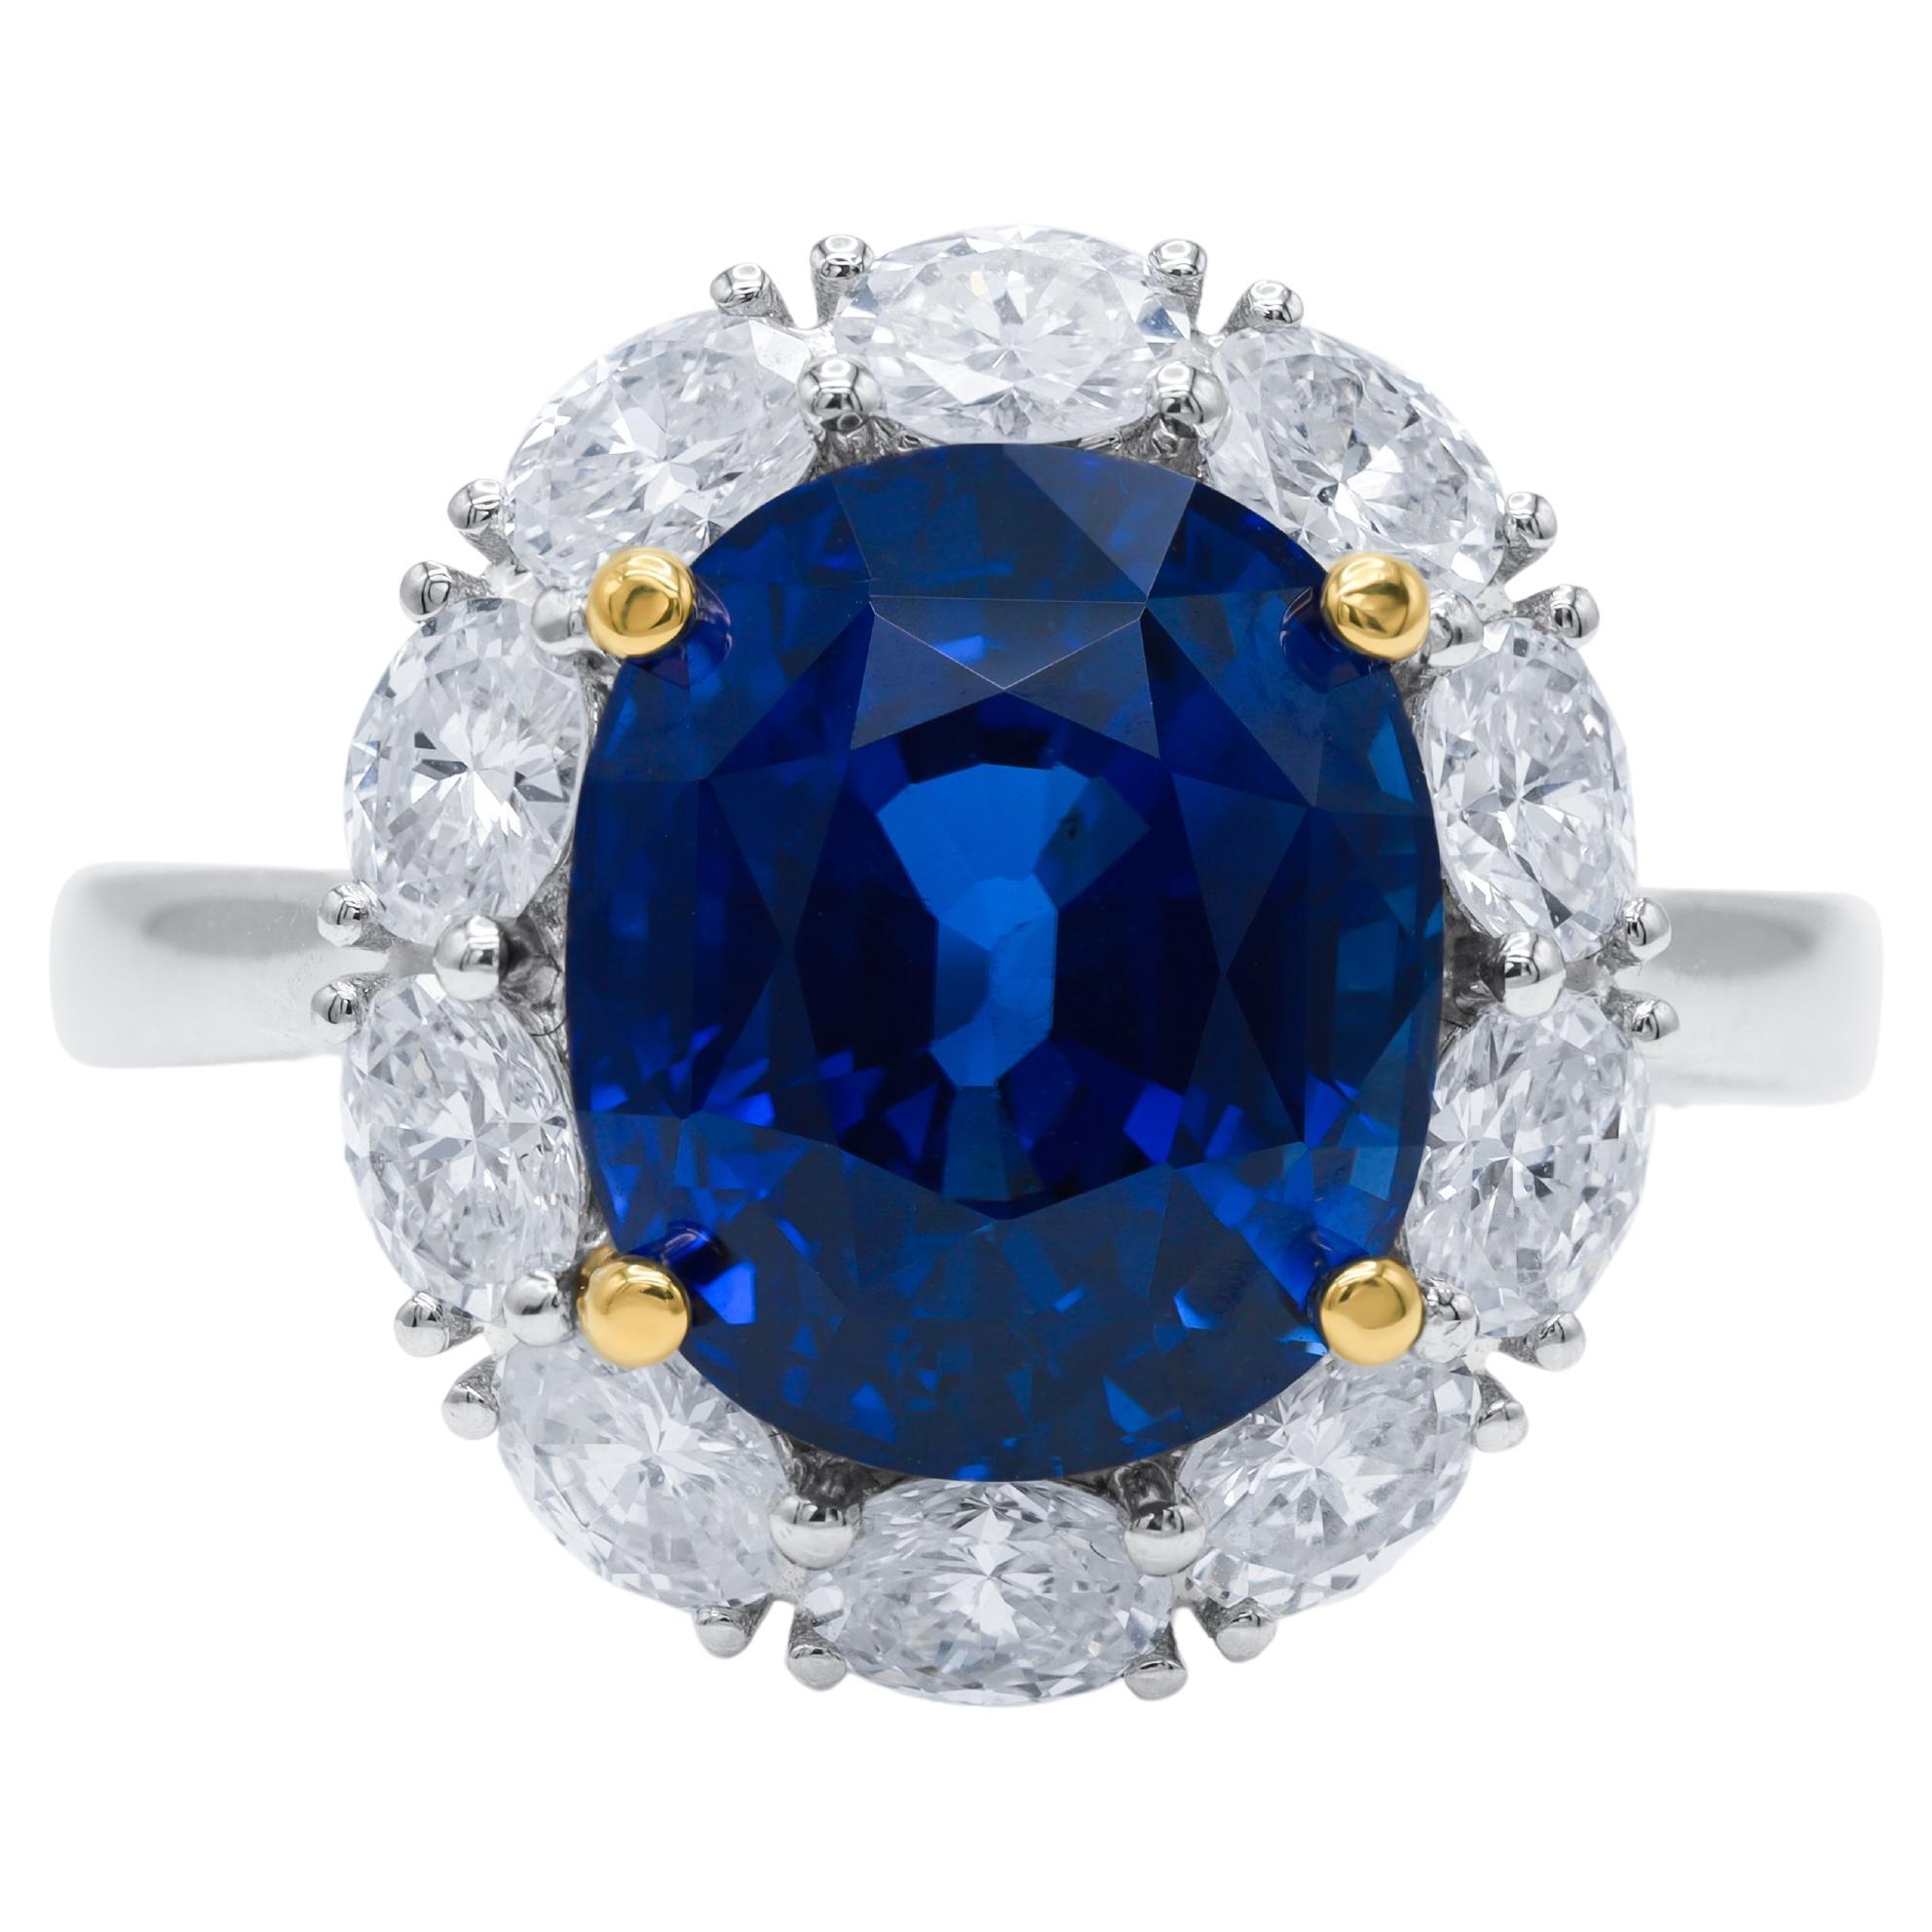 Diana M. Platinum sapphire and diamond Princess Diana ring featuring a 7.94 ct  For Sale